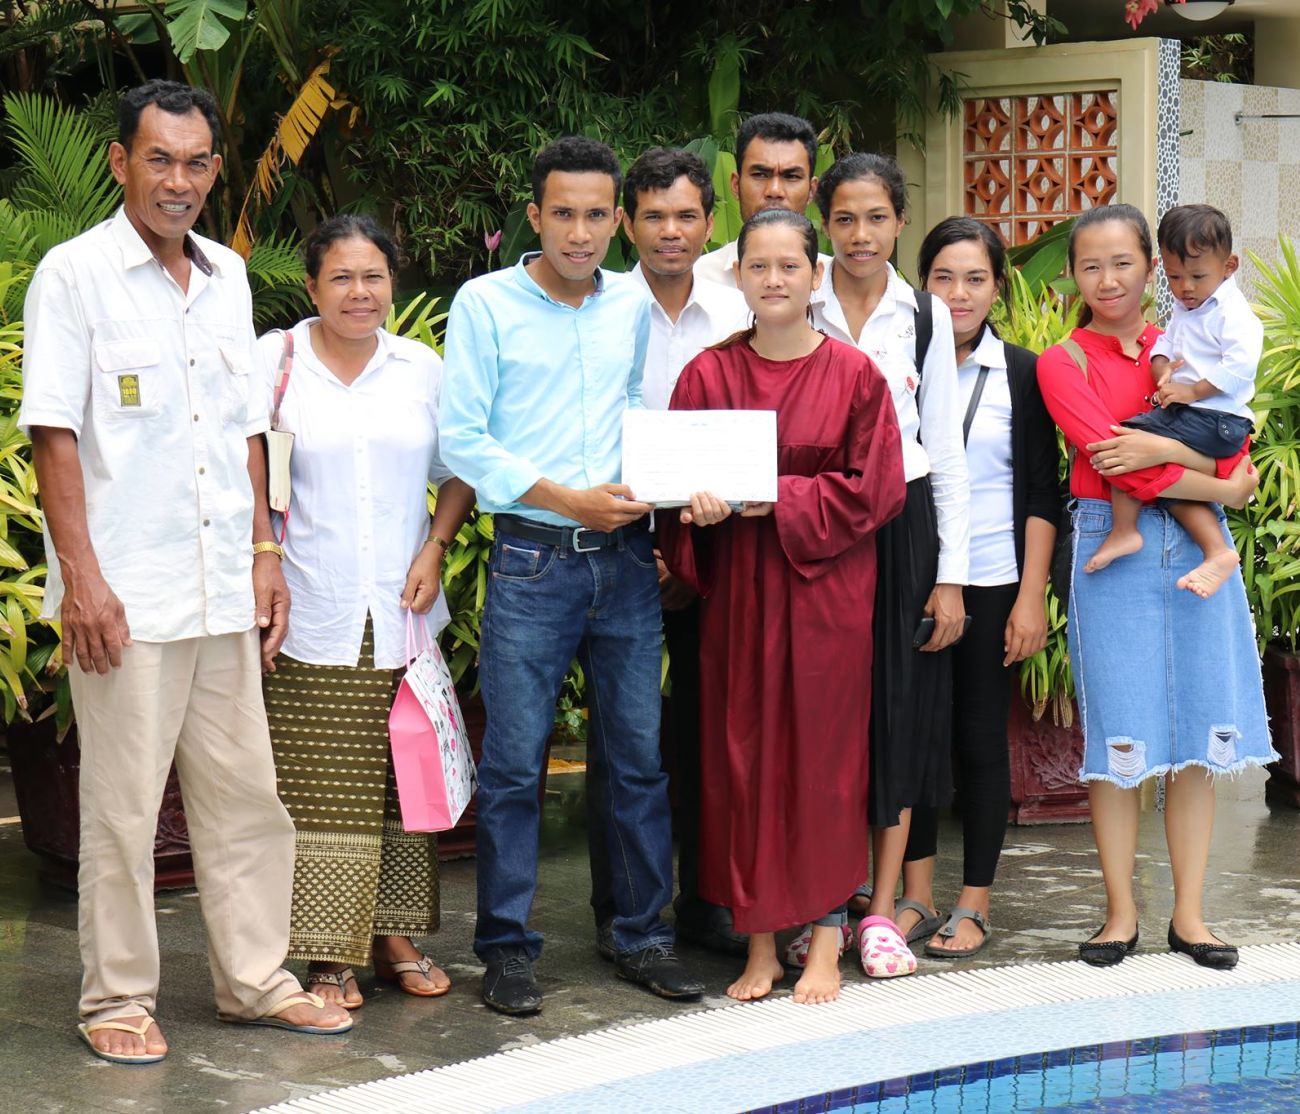 Men Marina, fourth from right, wearing a backpack and crocs, posing with her parents, siblings, and other relatives. (Family photo)